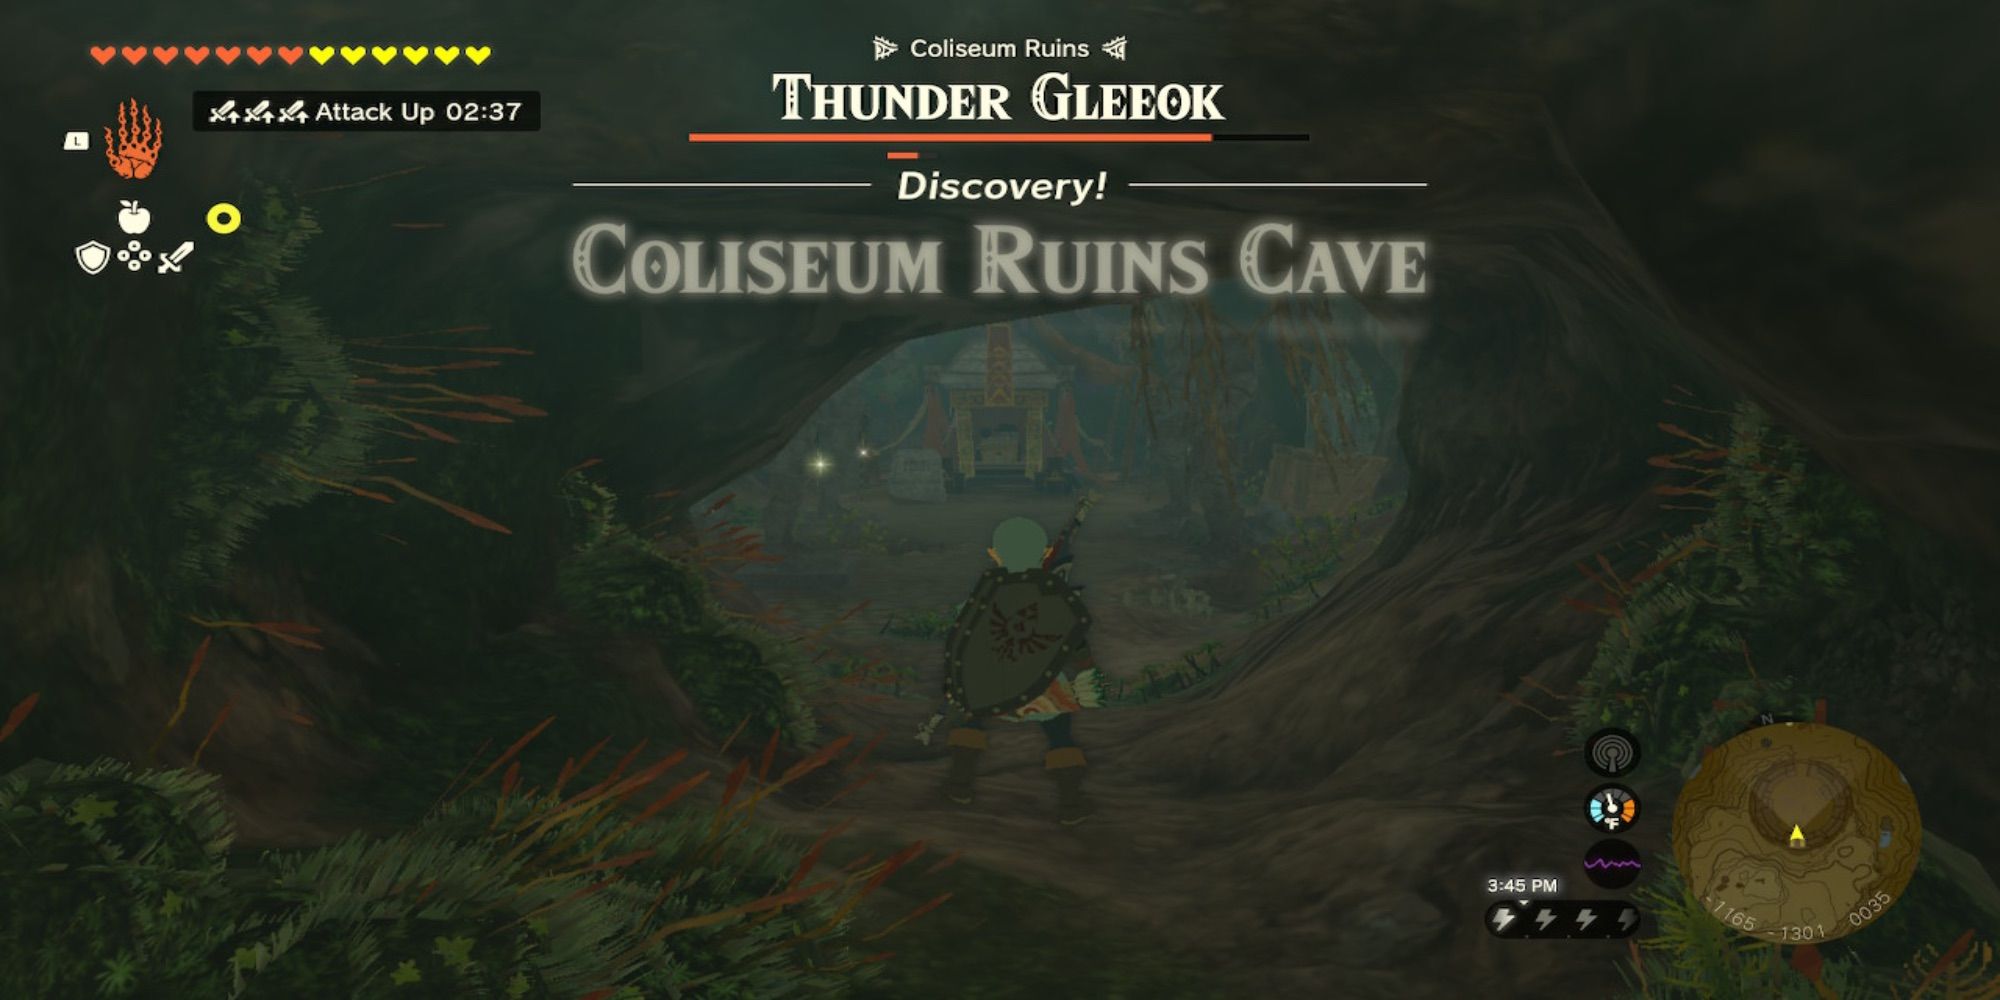 Cave of the Legend of Zelda's Tears from the Awakening Kingdom